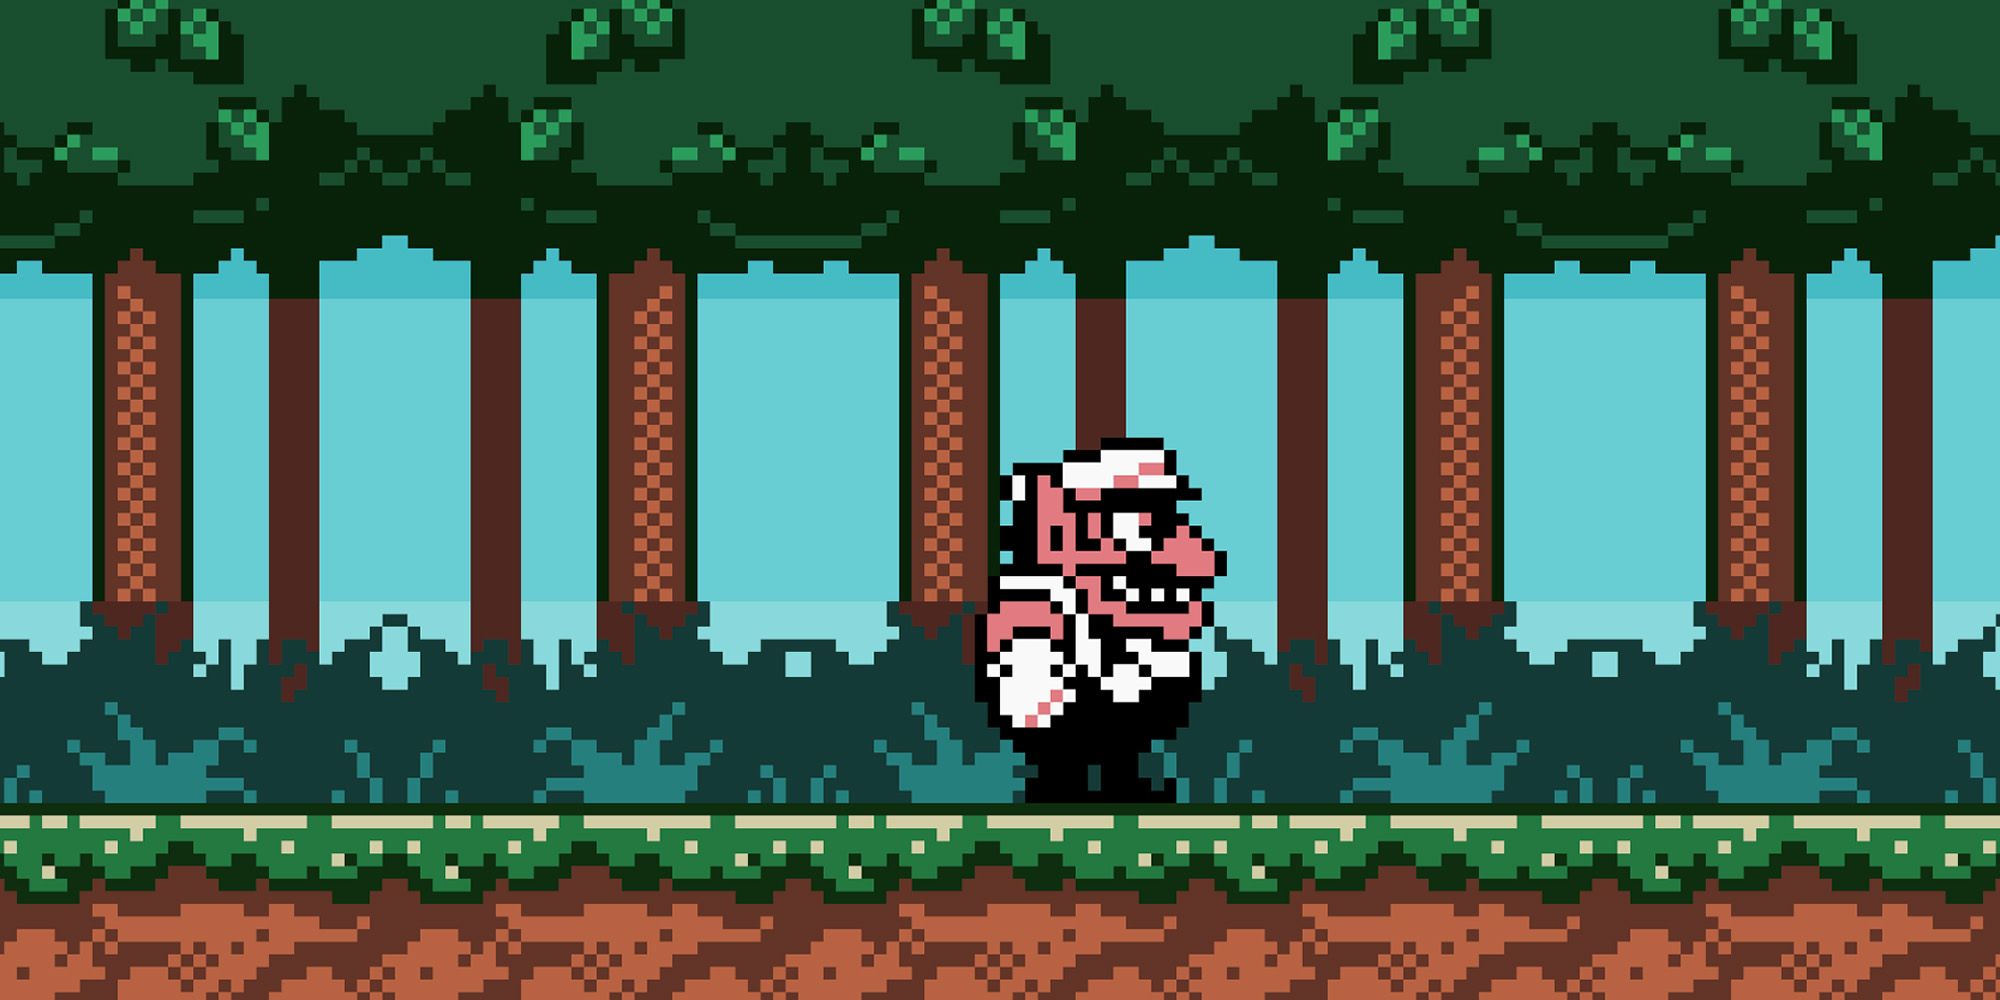 Wario Land 3 - Wario Standing In A Forest